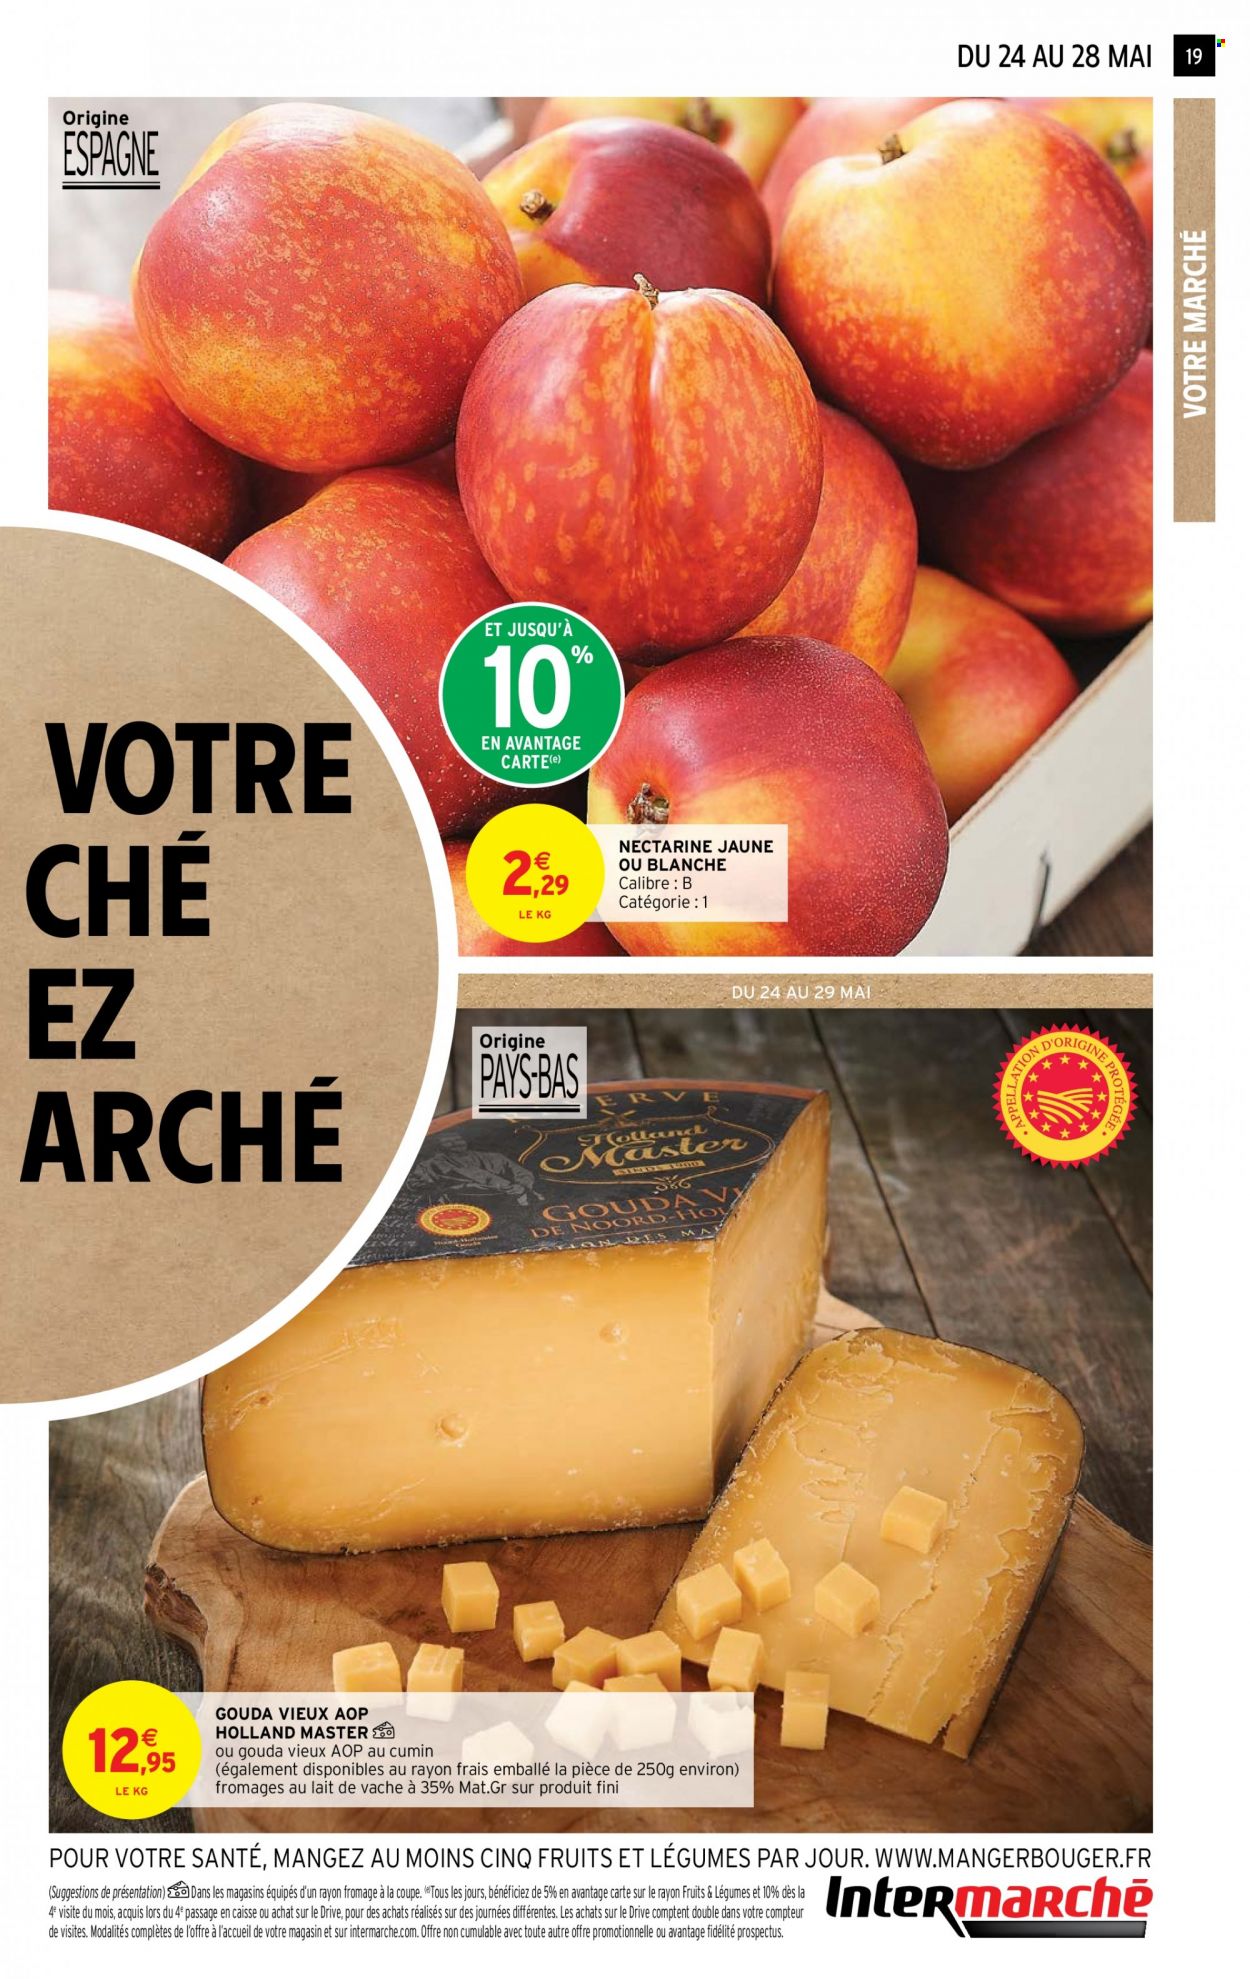 thumbnail - Catalogue Intermarché Hyper - 24/05/2022 - 05/06/2022 - Produits soldés - nectarine, fromage. Page 19.